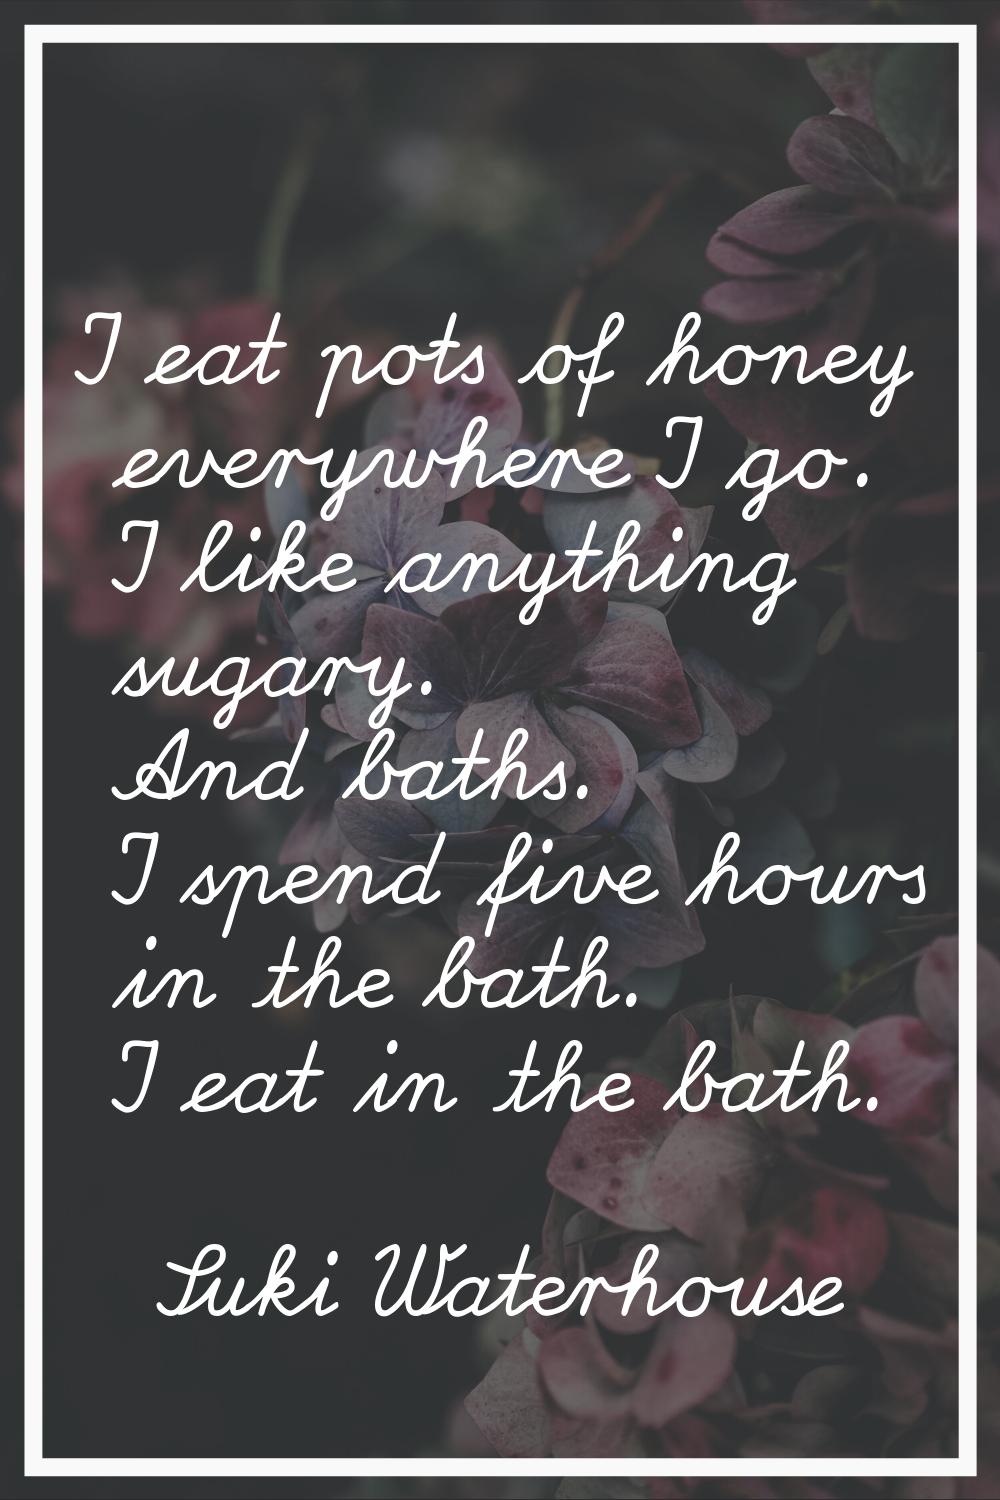 I eat pots of honey everywhere I go. I like anything sugary. And baths. I spend five hours in the b